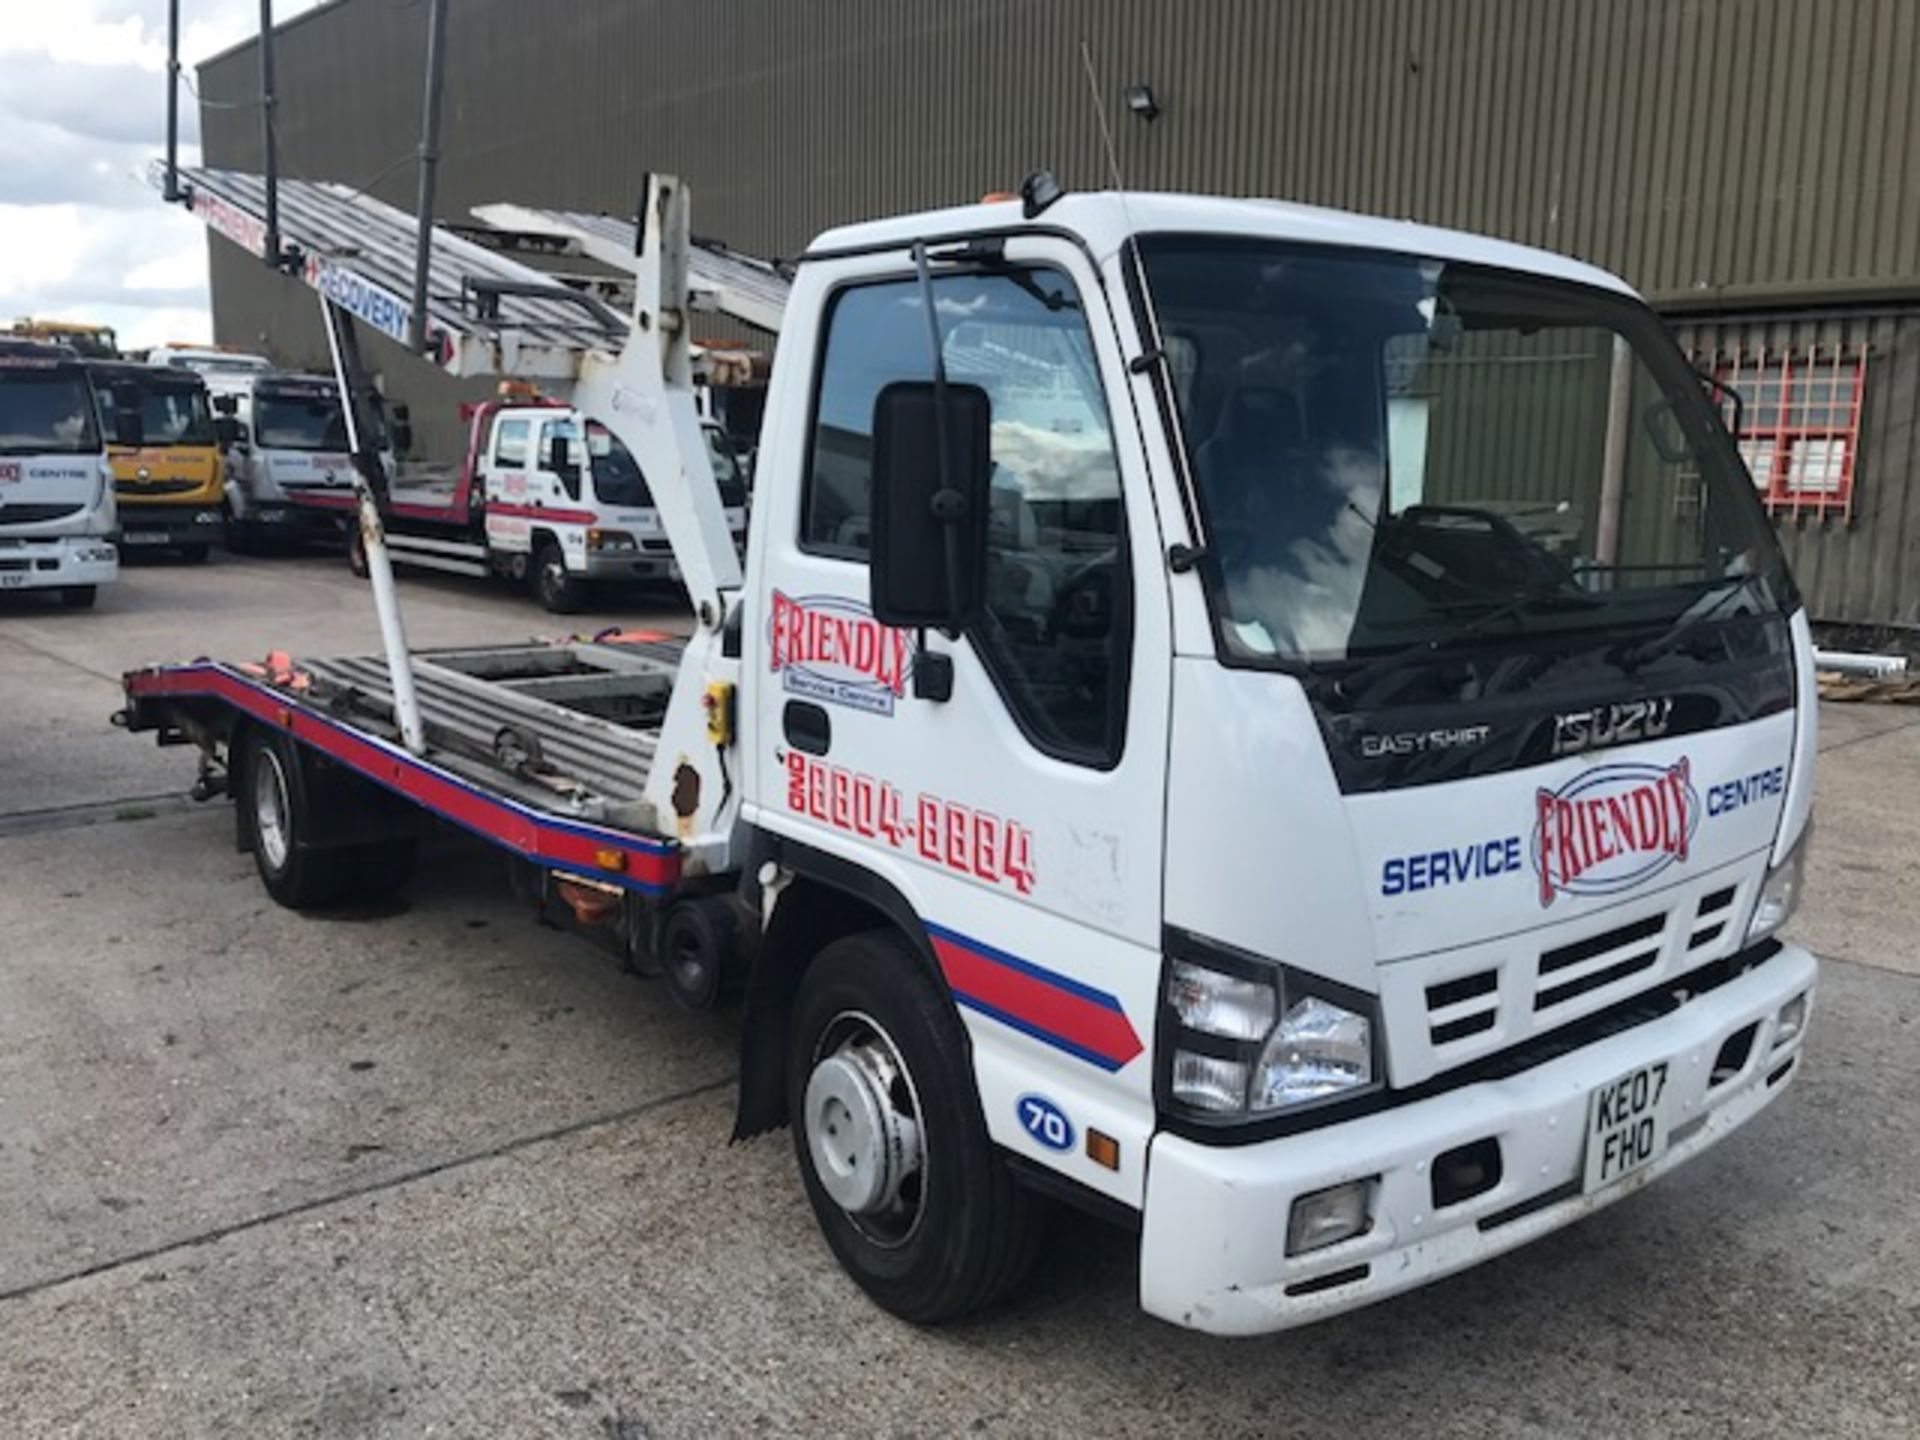 2007 Isuzu NQR 70 7.5T twin deck breakdown recovery vehicle complete with Worldwide Recovery